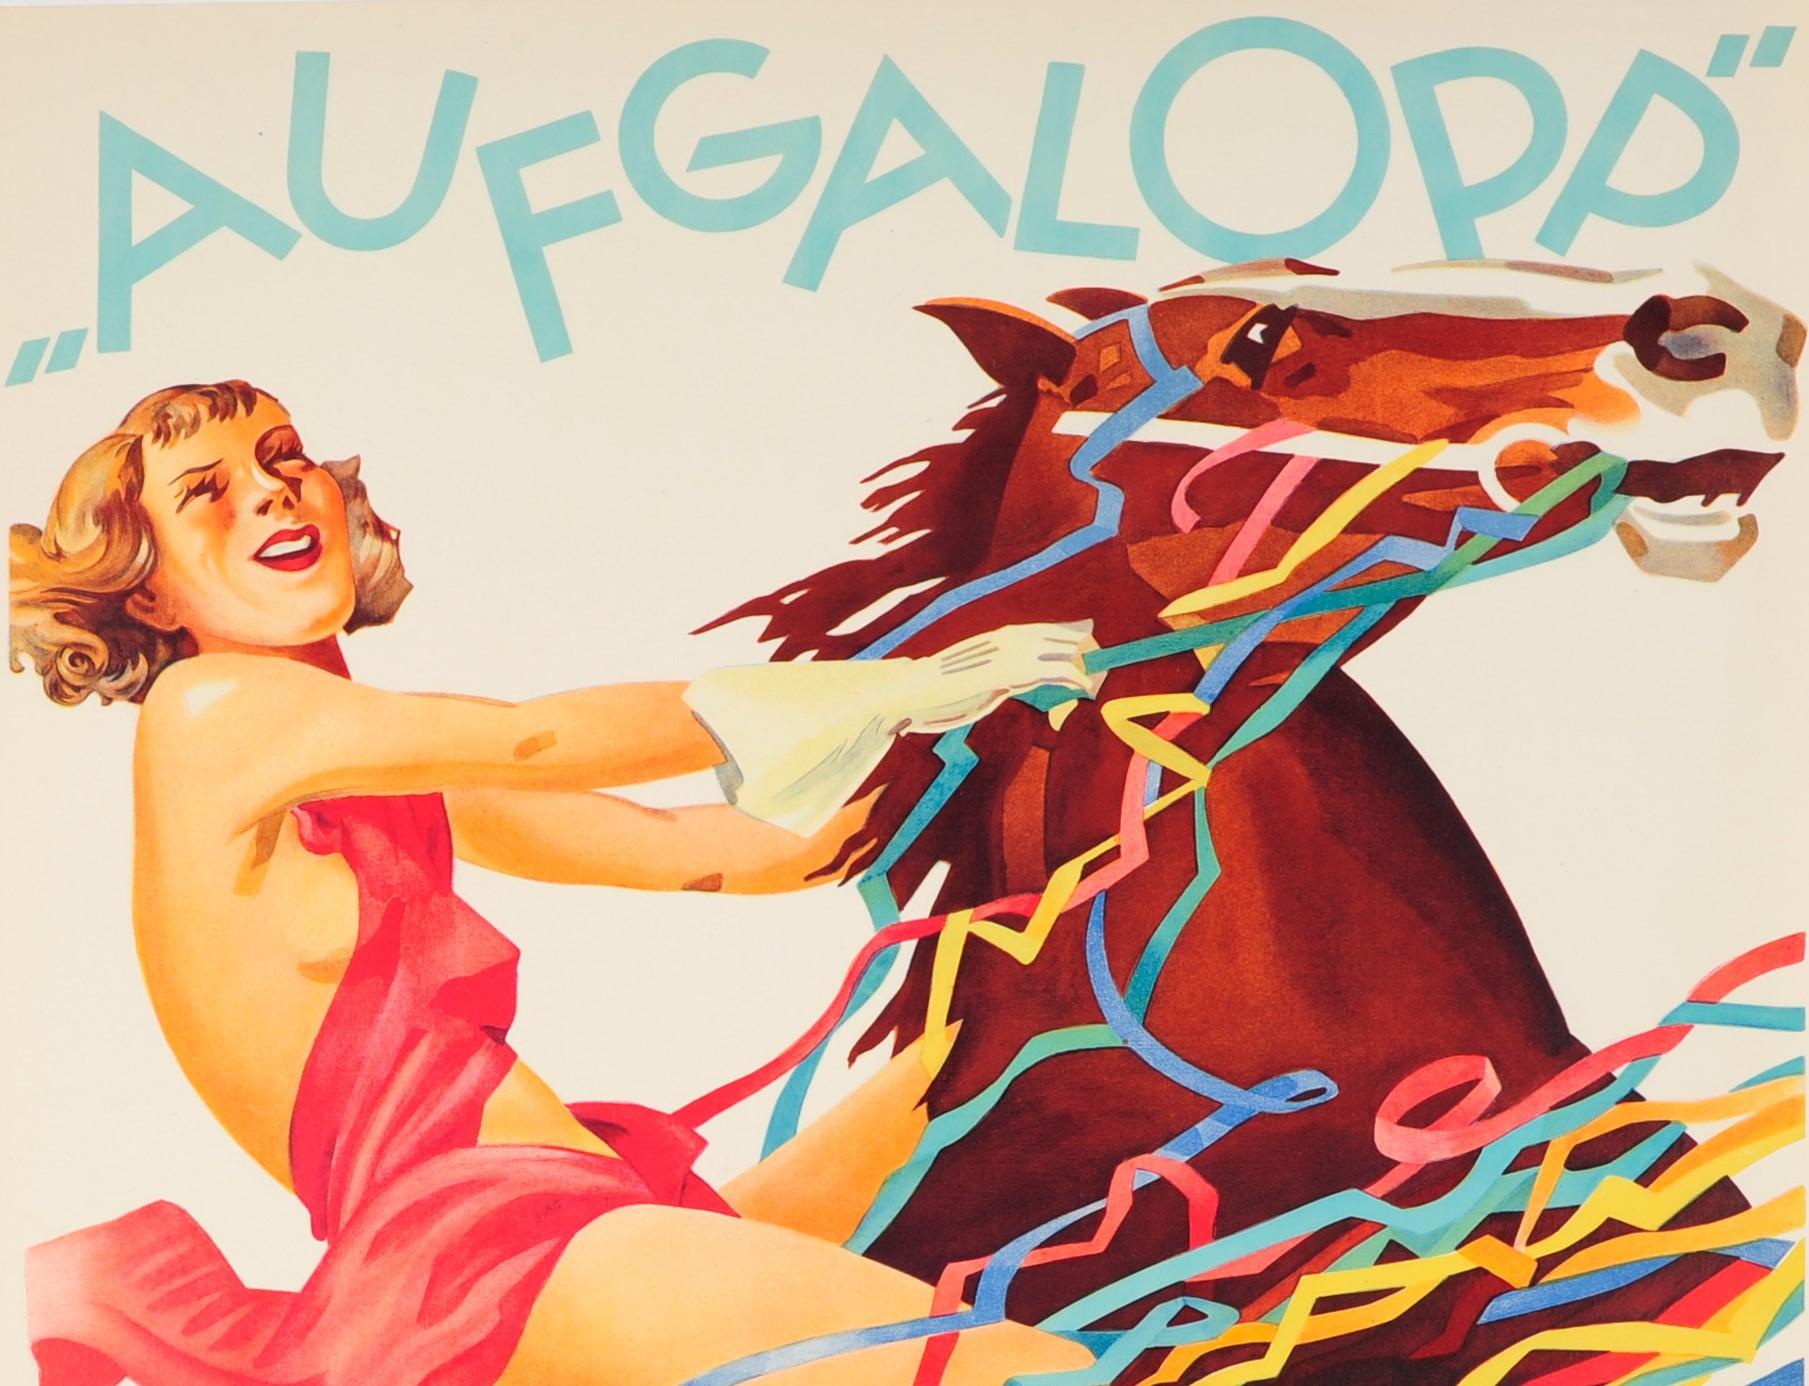 Original Vintage Poster For The Aufgalopp Faschingsfest Carnival Munich Ft Horse - Print by Unknown